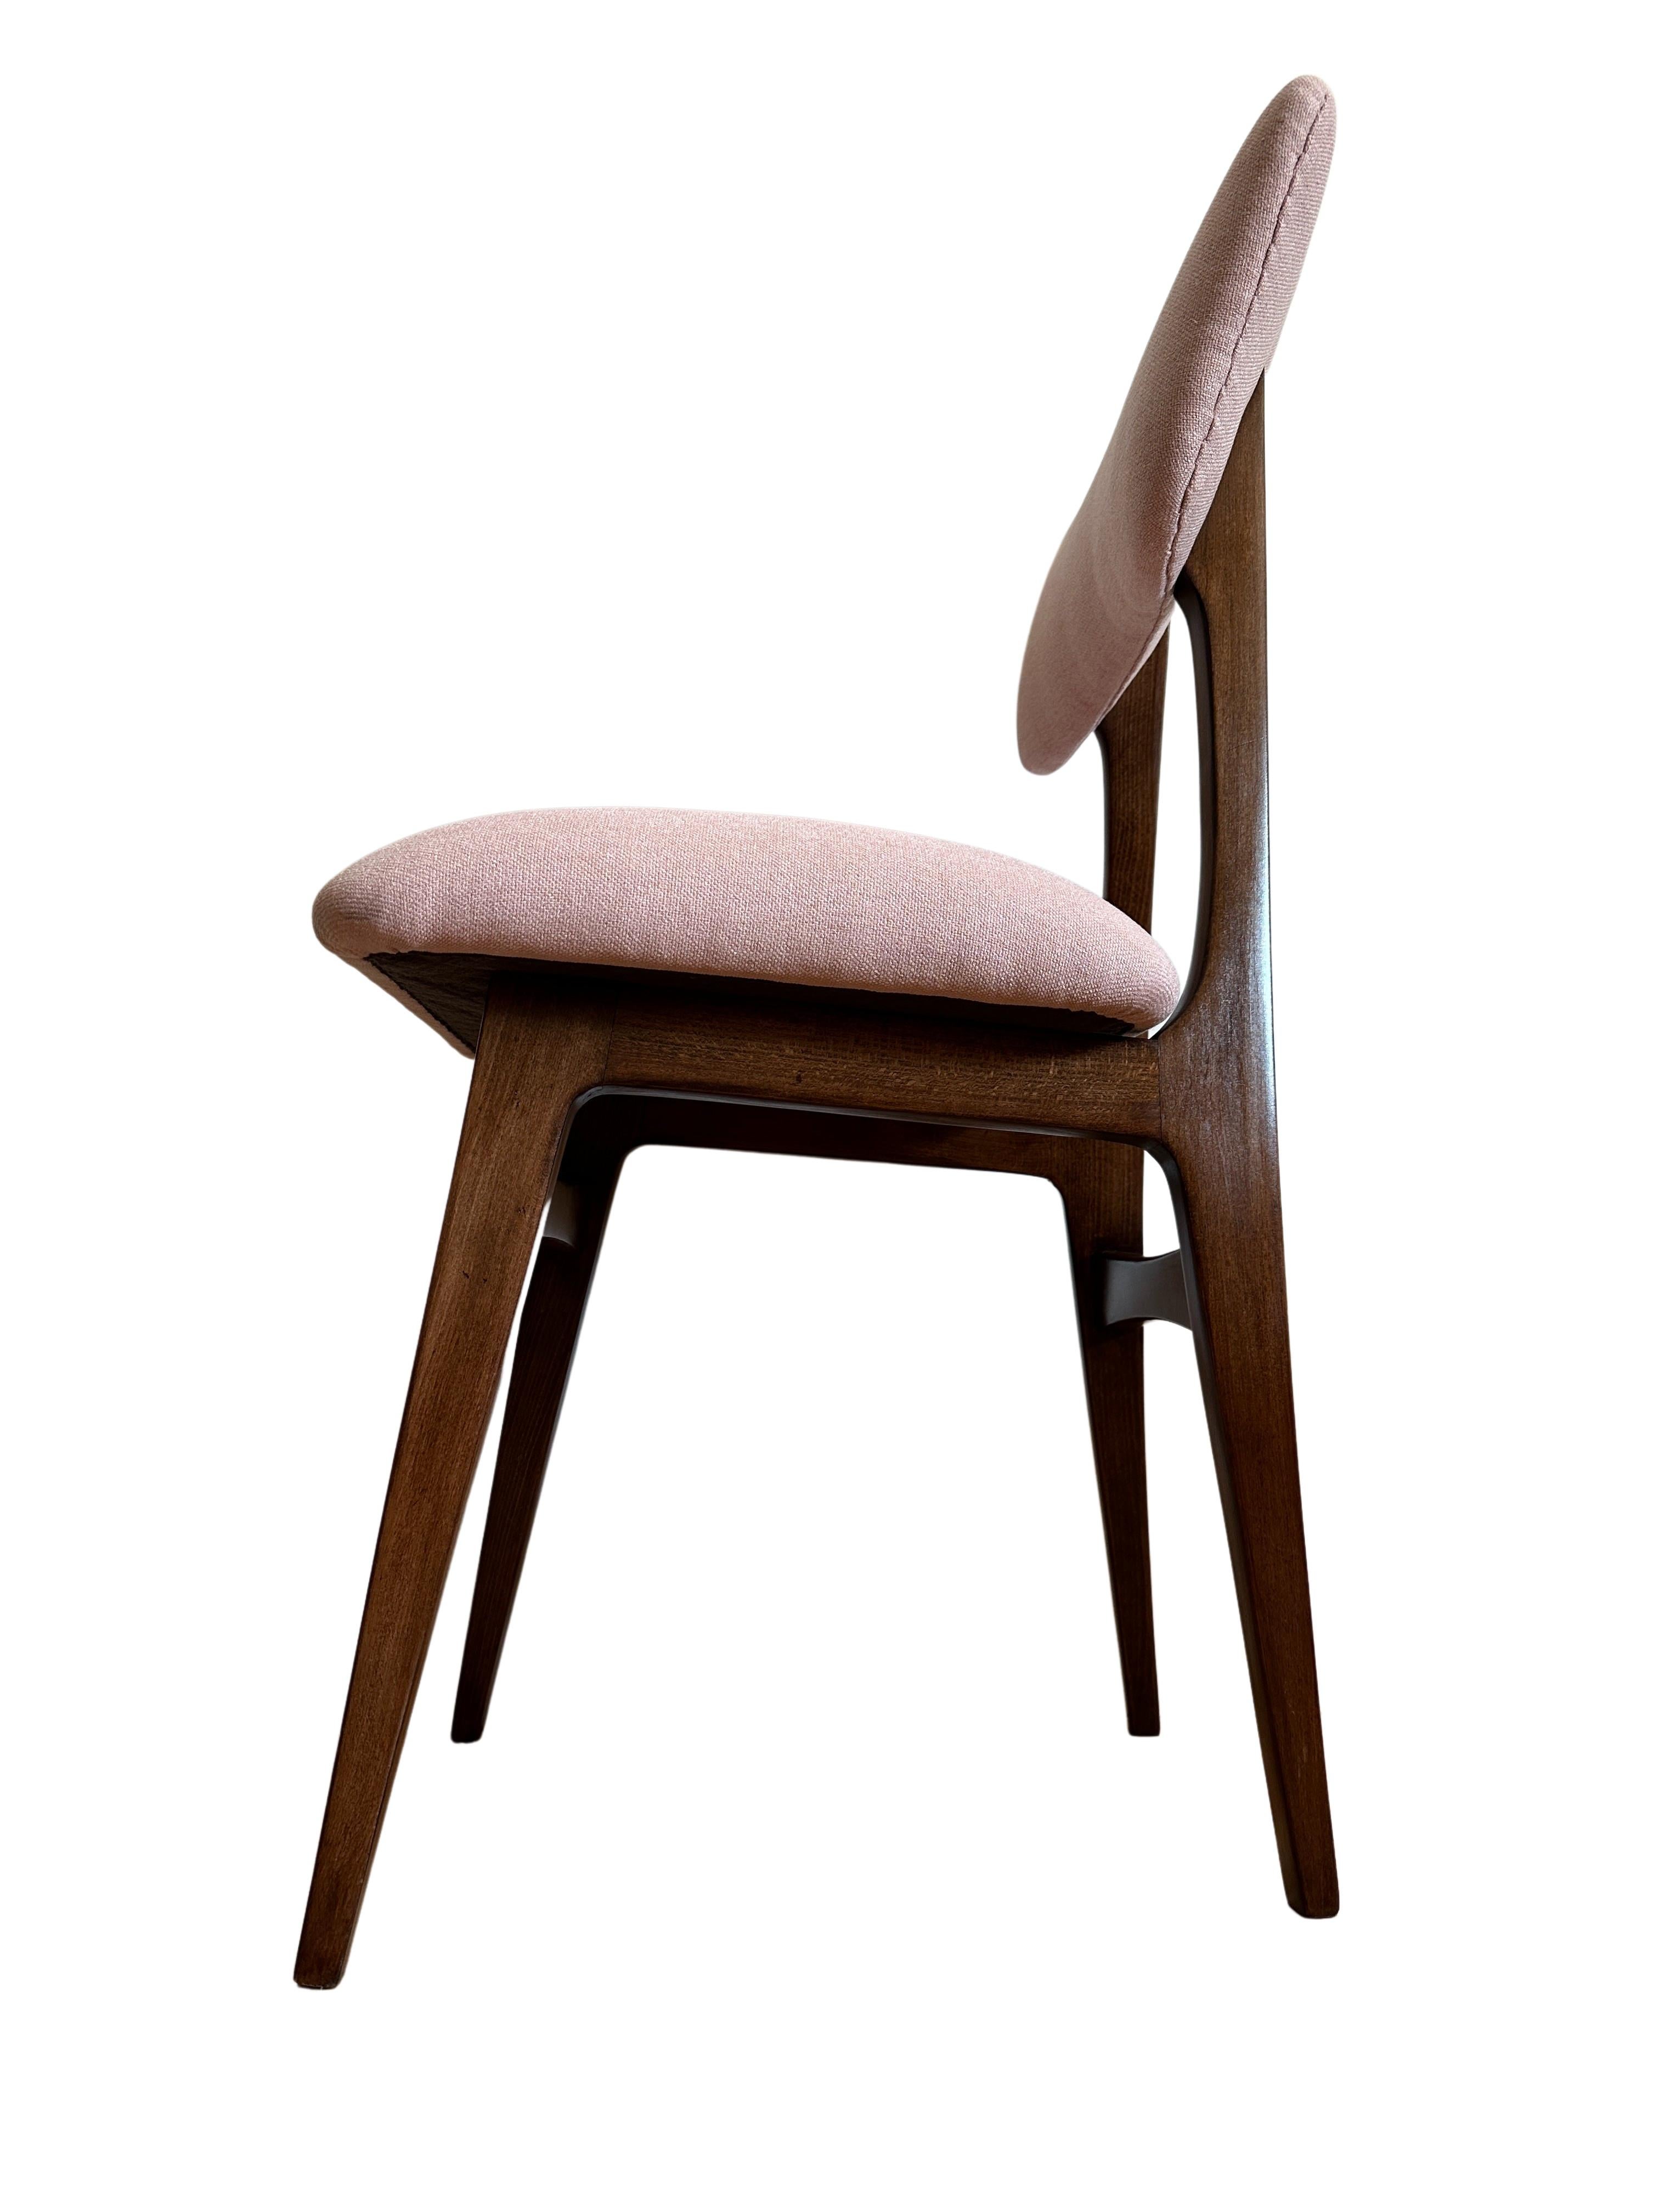 Hand-Crafted Midcentury Wooden Dining Chair in Light Pink Upholstery, Europe, 1960s For Sale